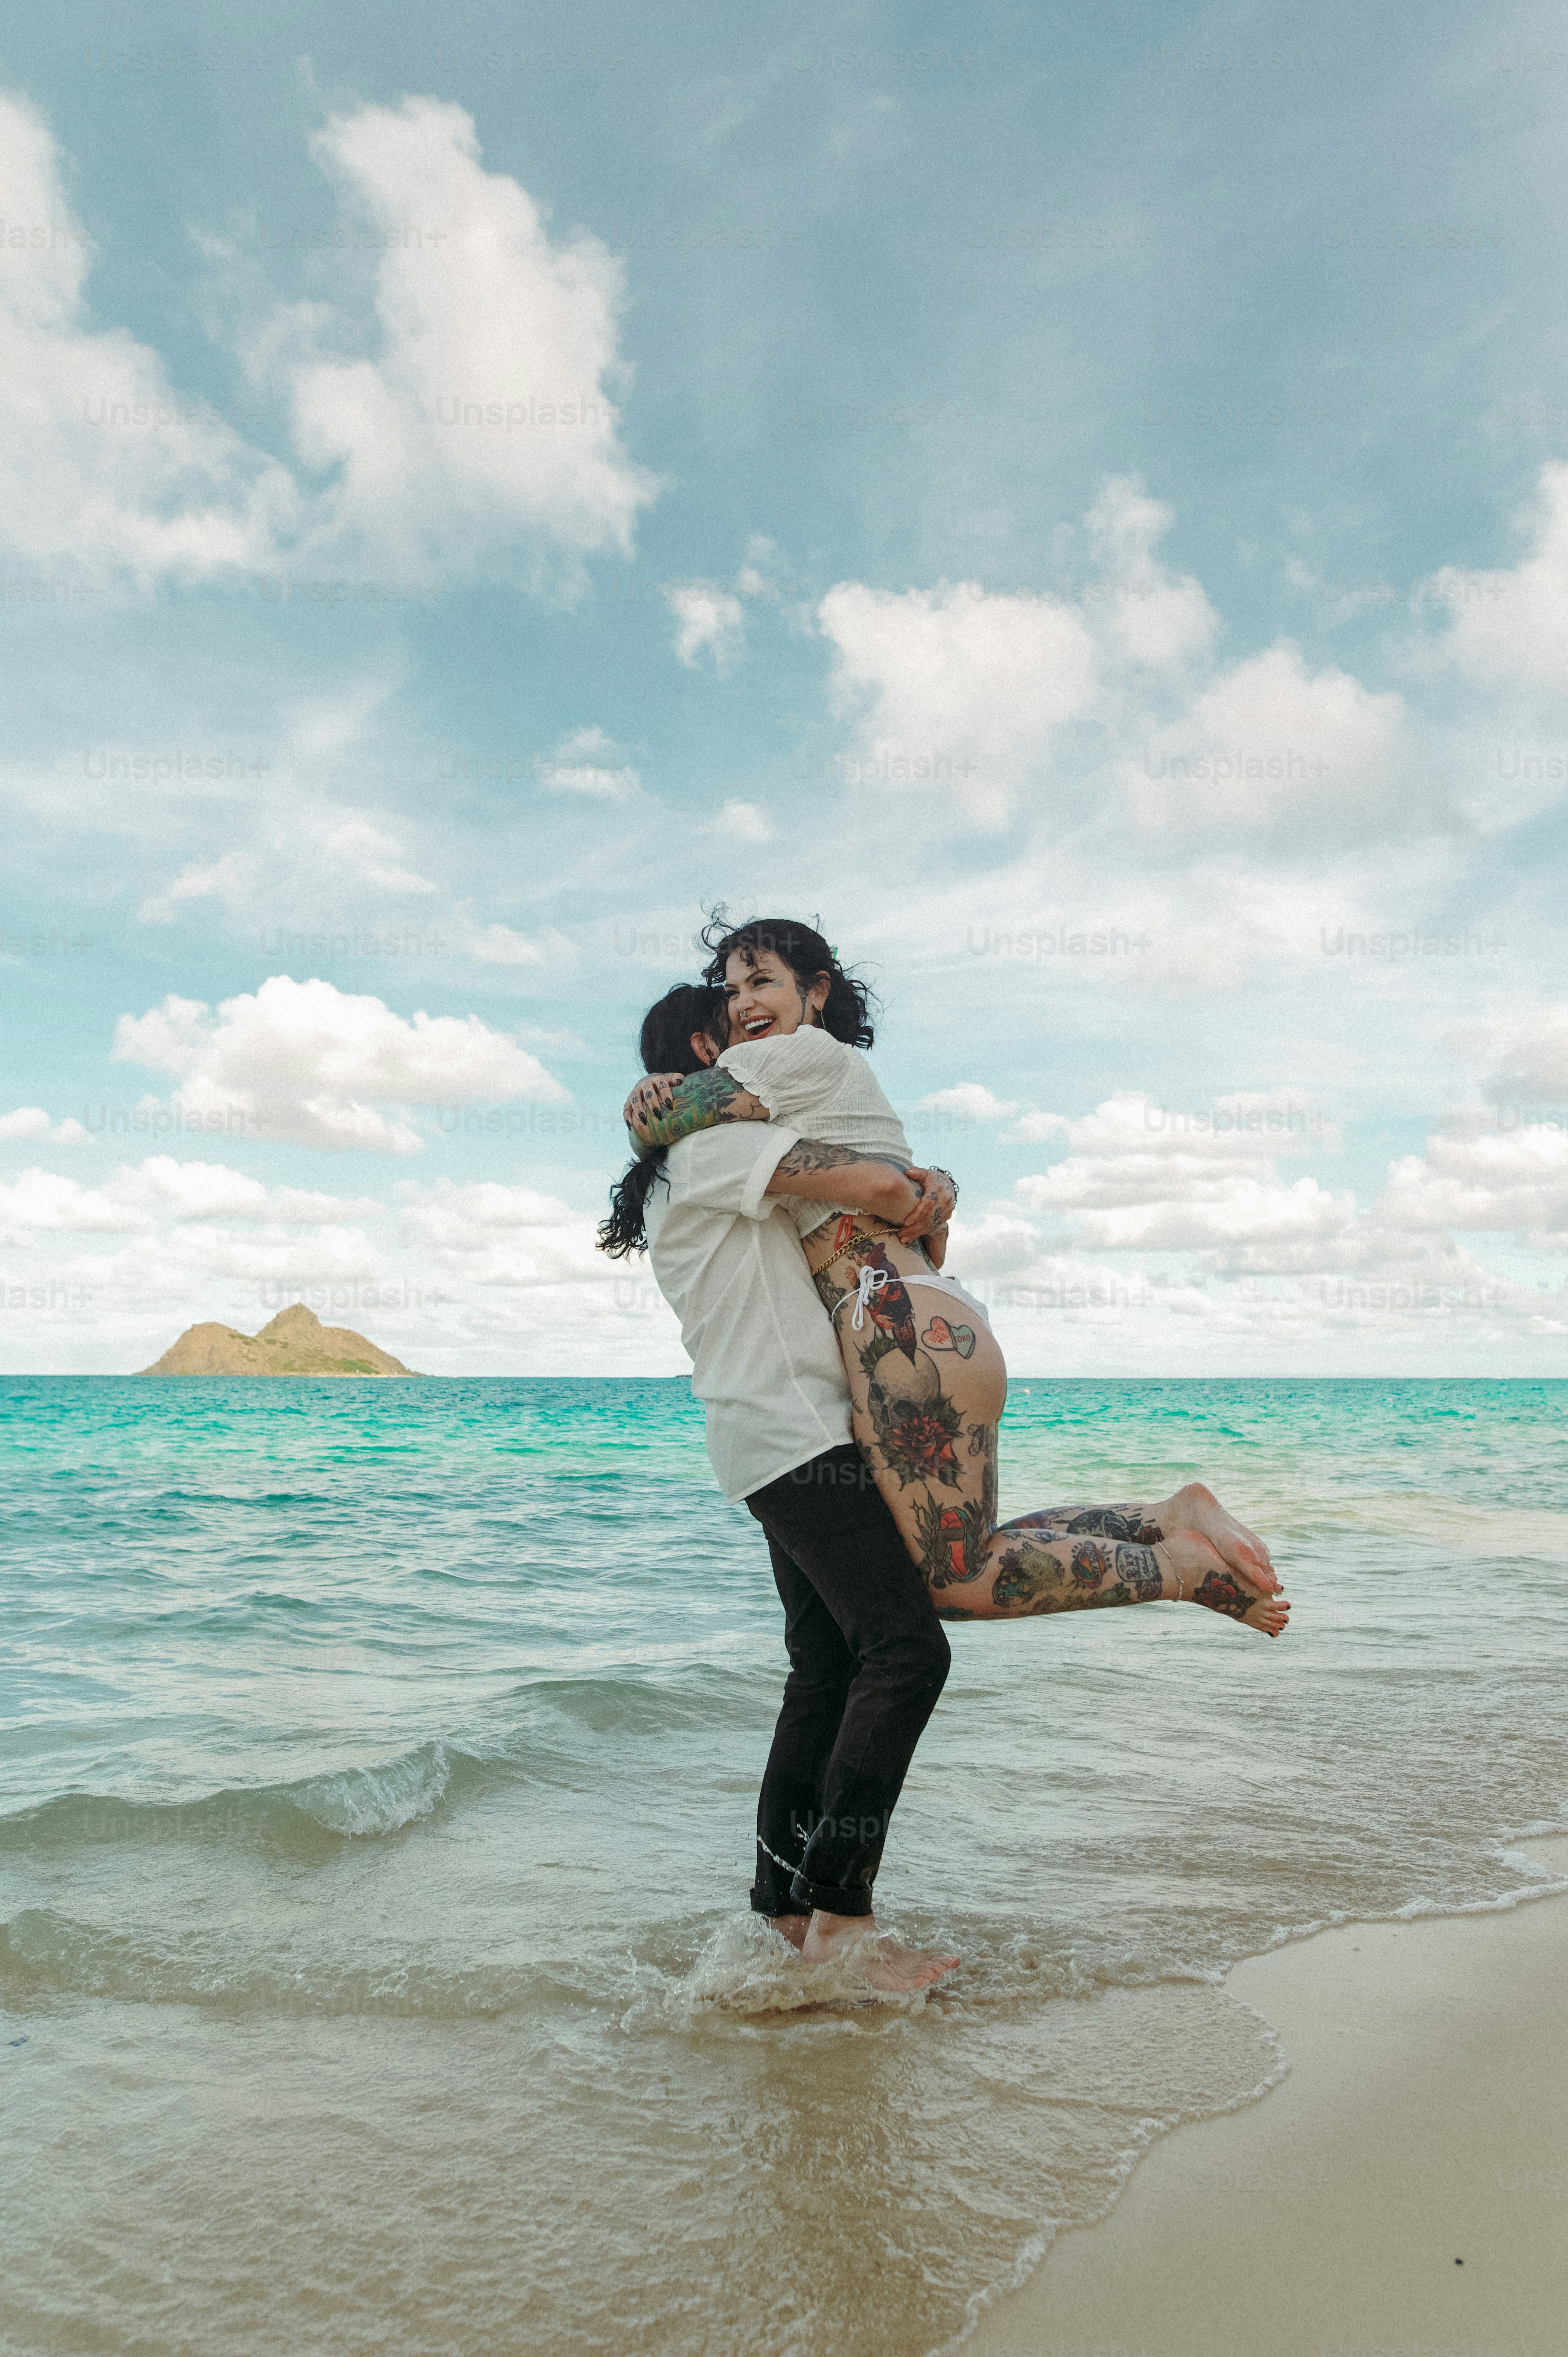 500+ Beach Love Pictures HD Download Free Images on Unsplash